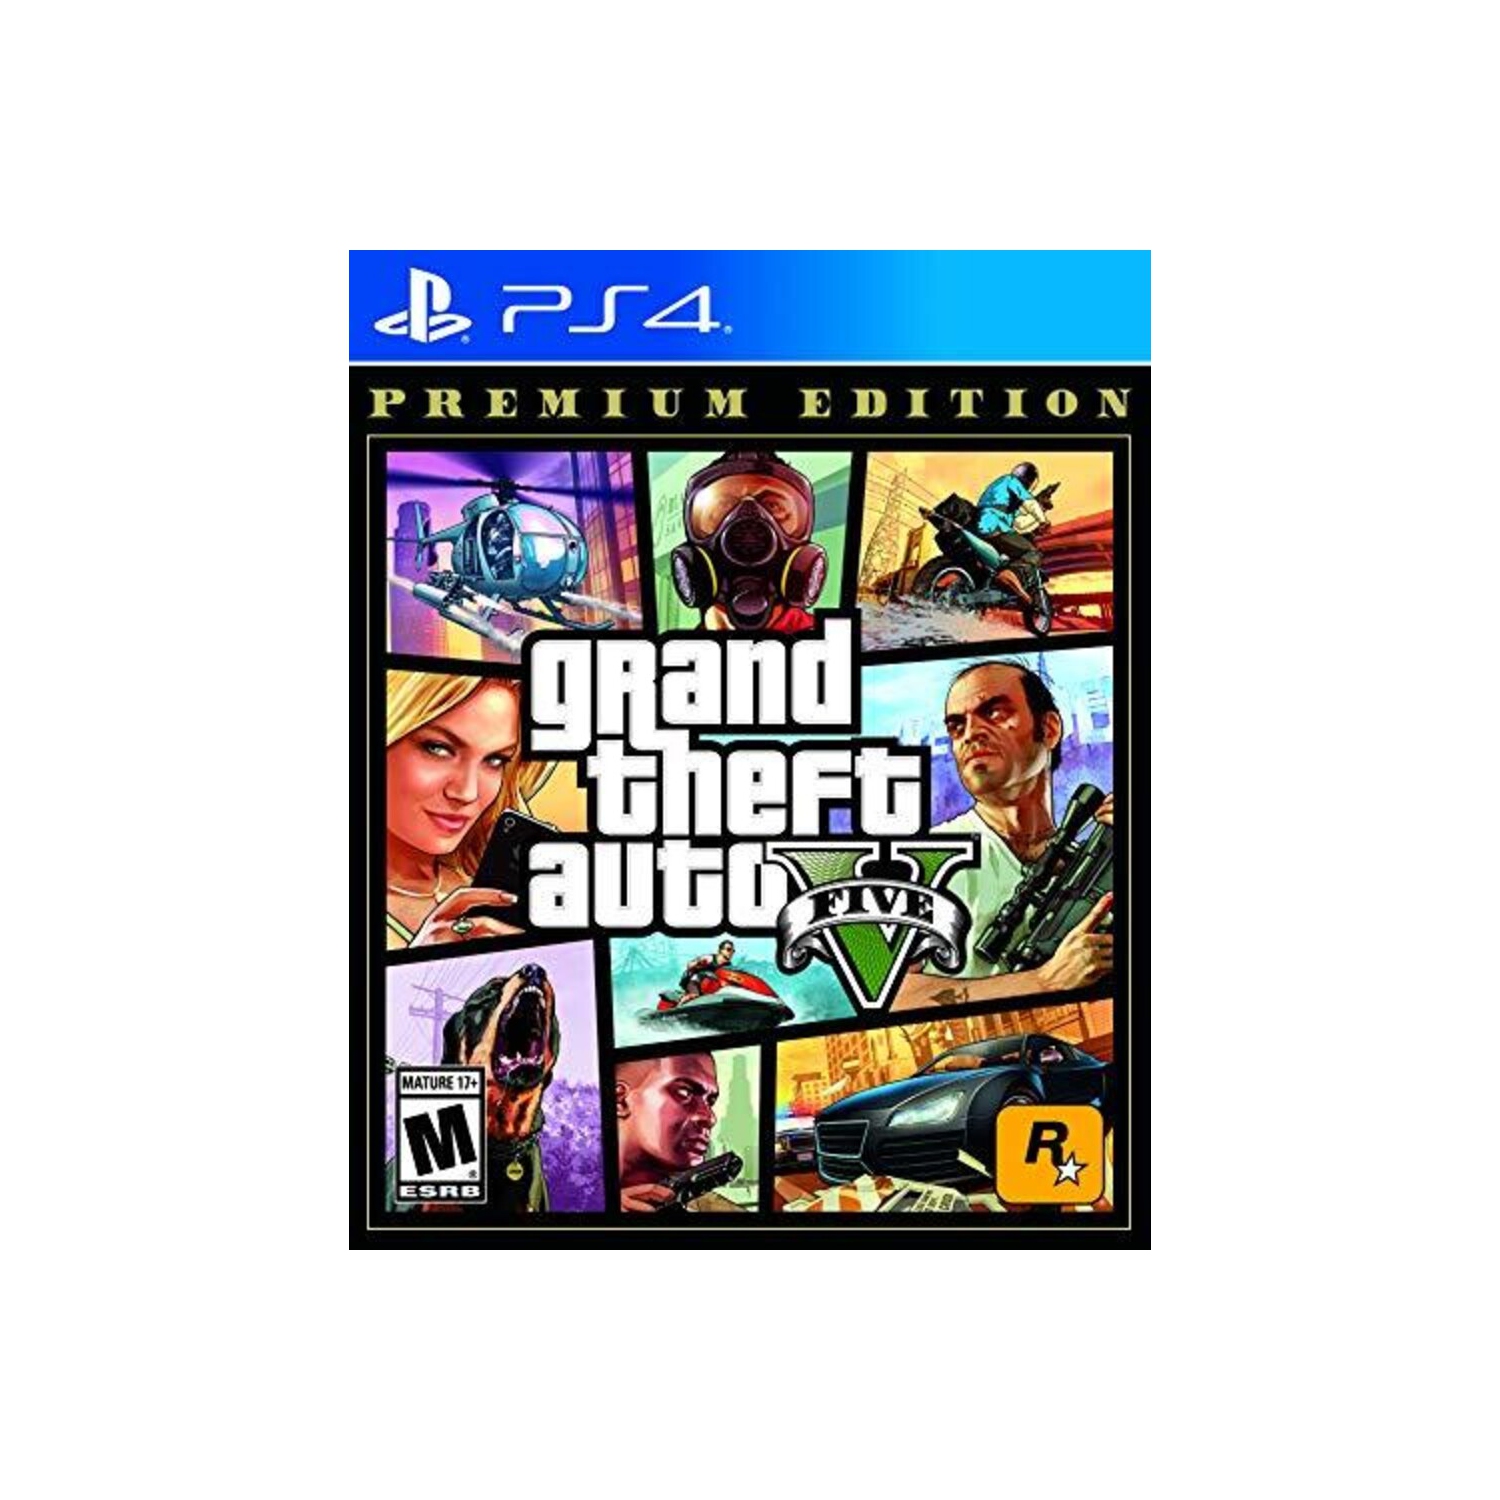 Grand Theft Auto V Premium Online Edition for PlayStation 4 StandardEdition [VIDEOGAMES]